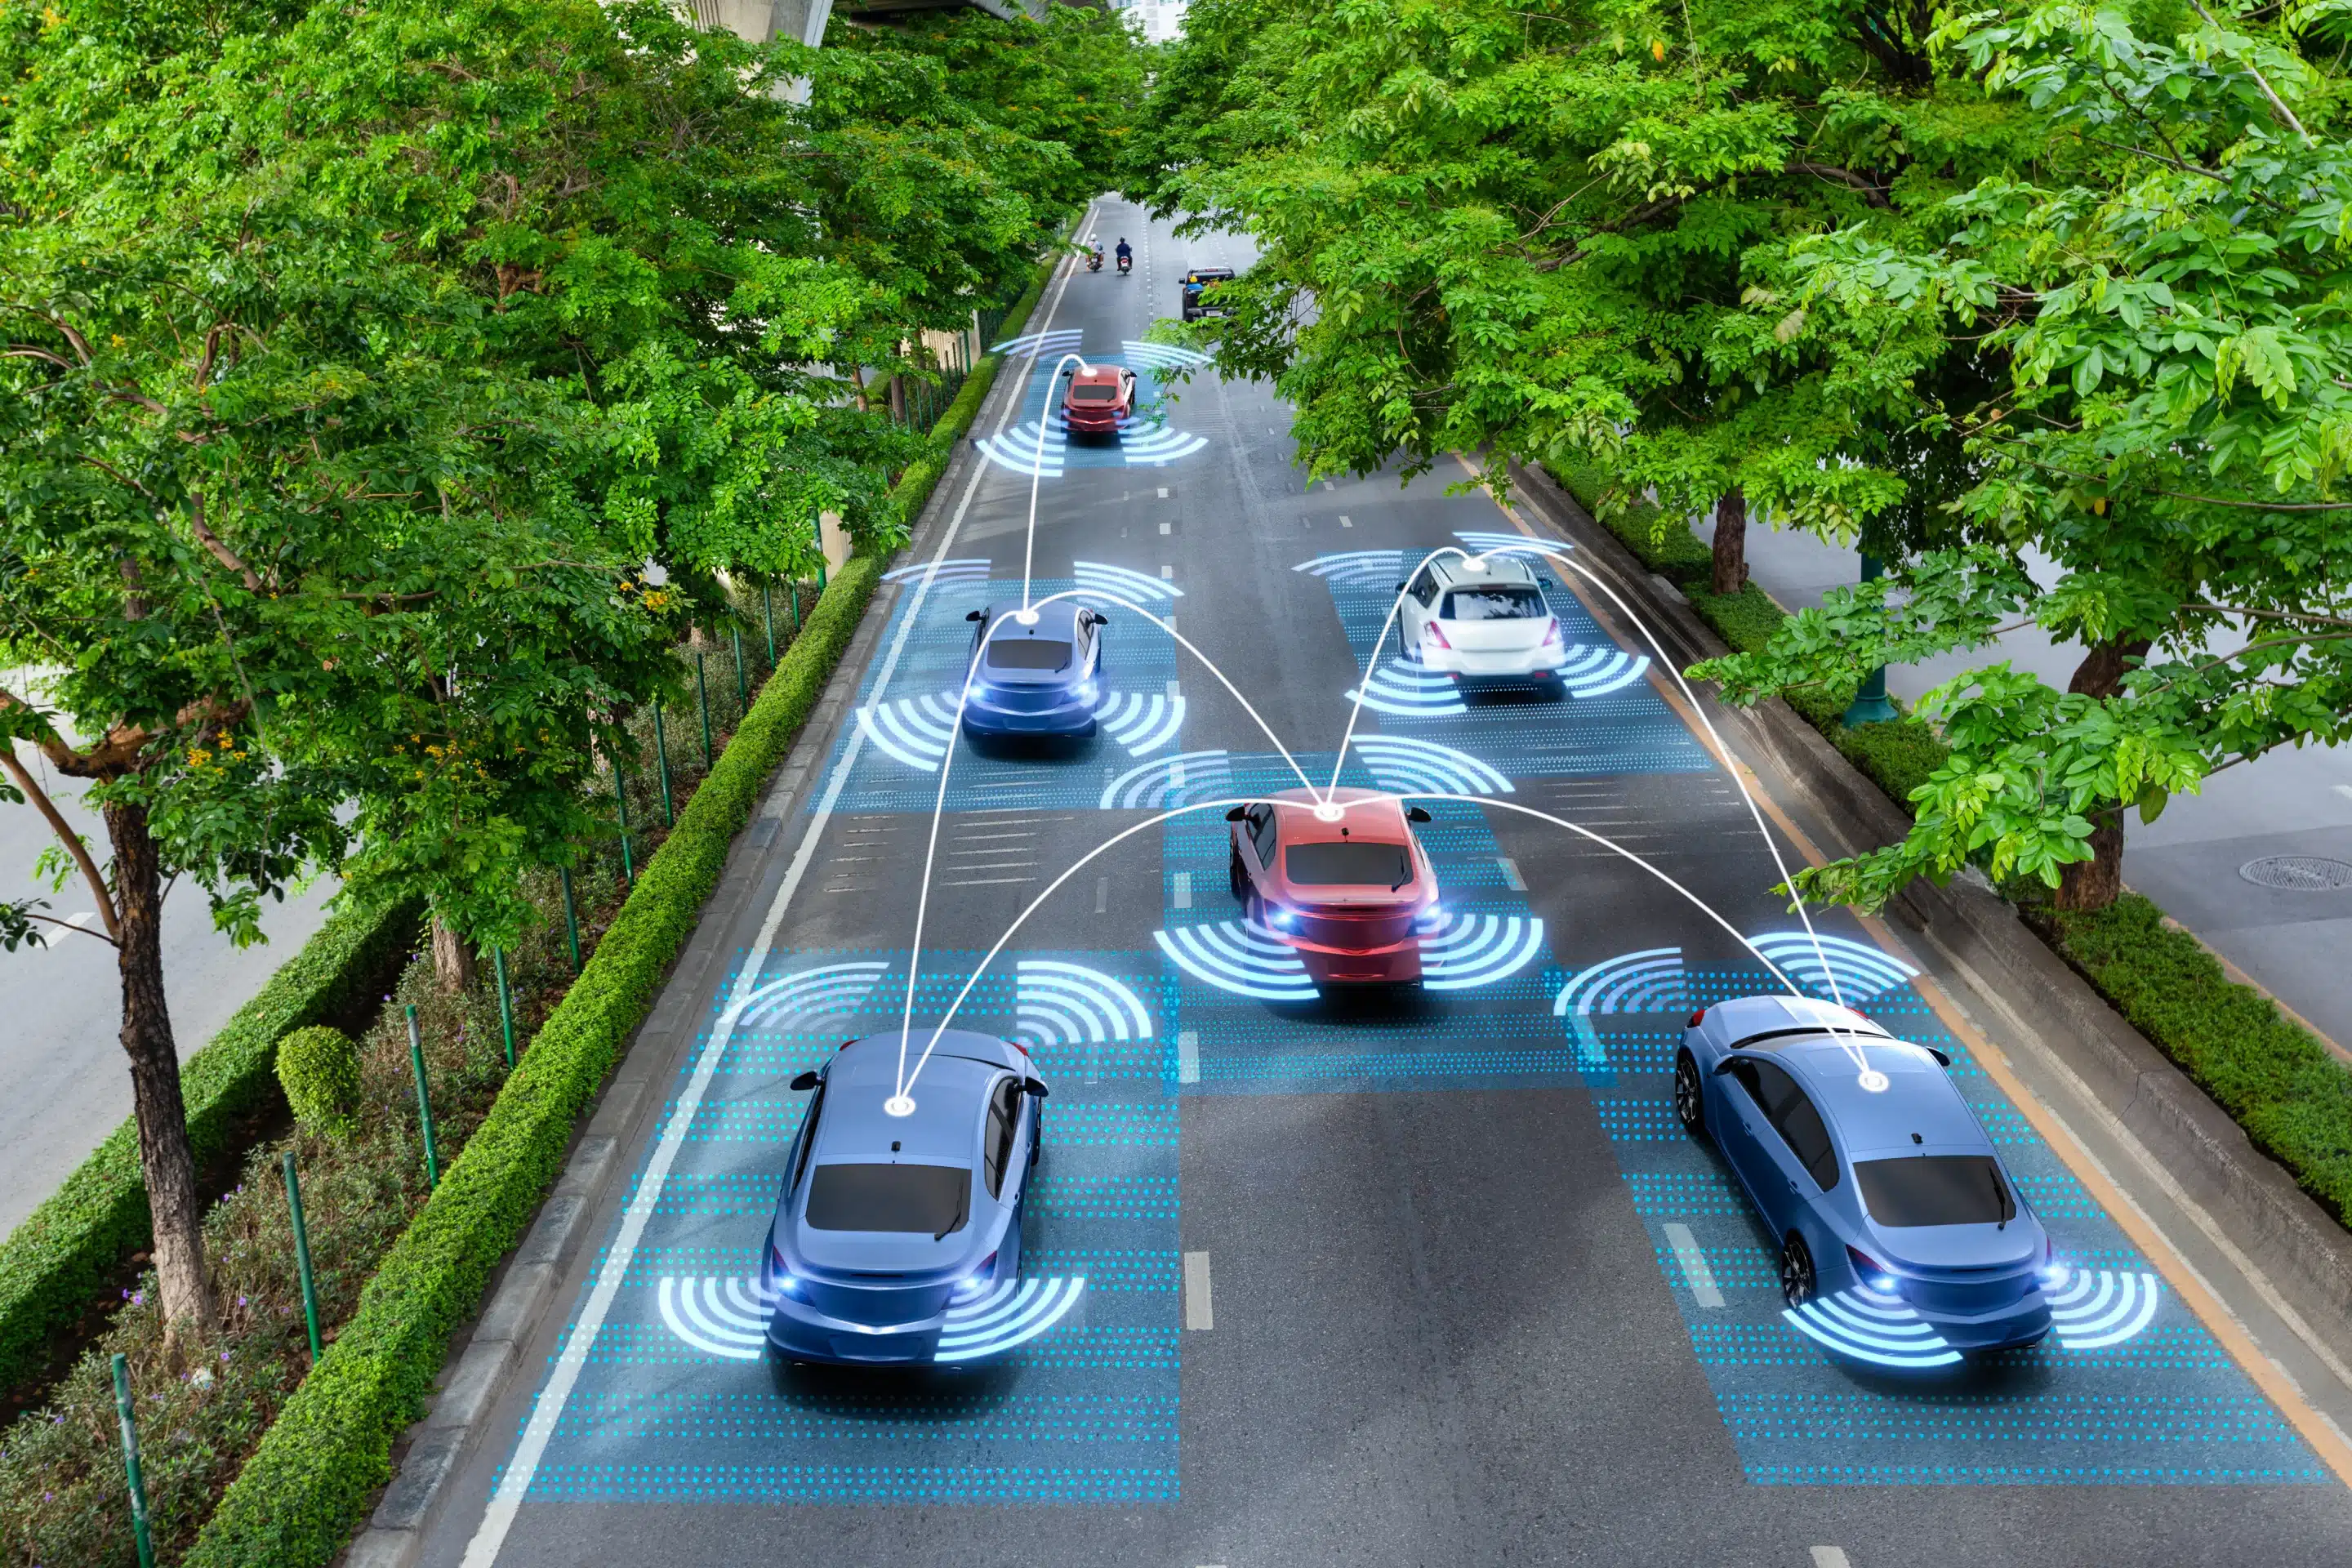 self-driving cars with sensor systems